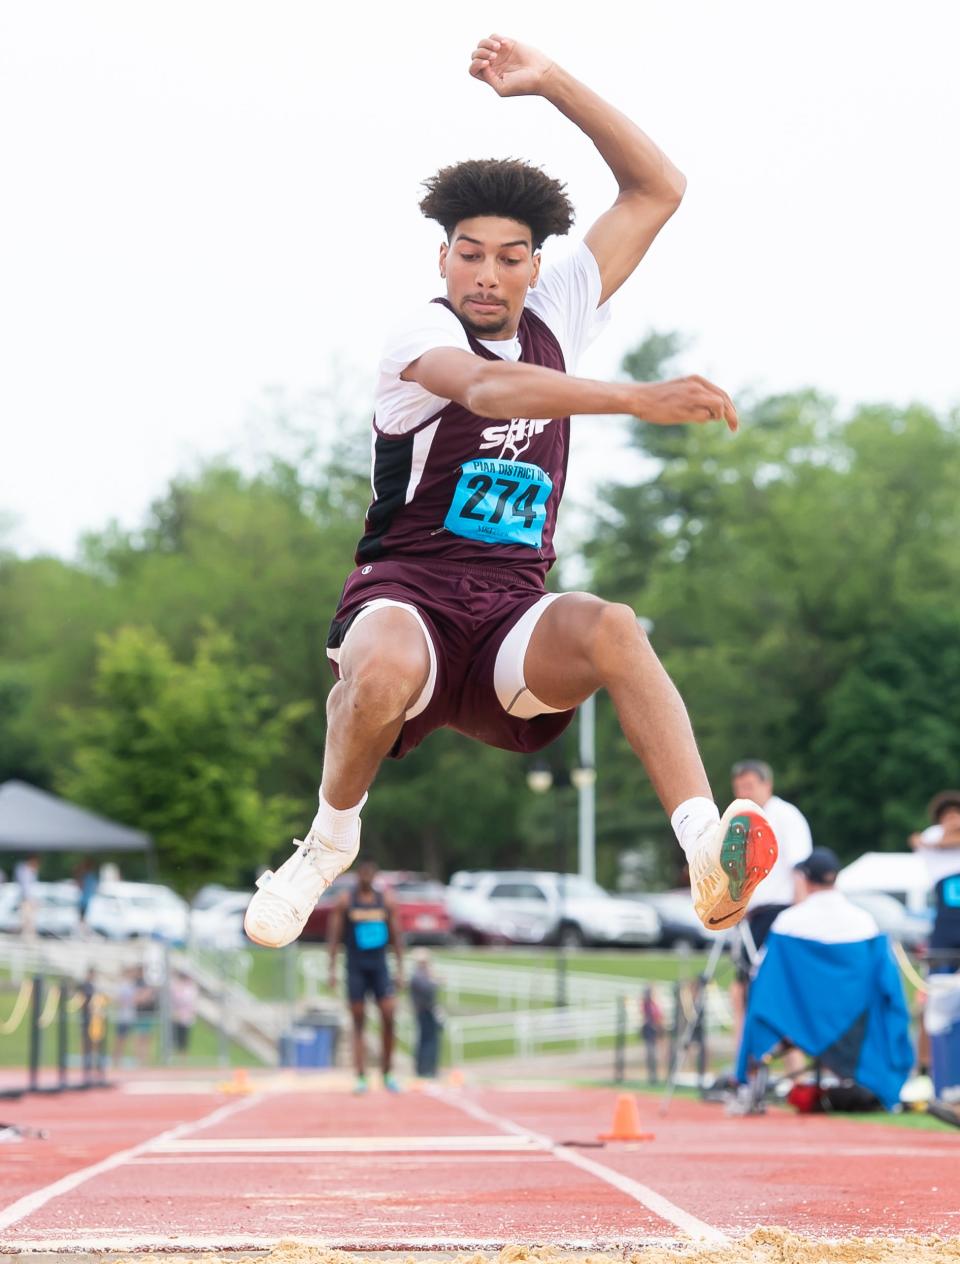 Shippensburg's Spencer Edey competes in the 3A triple jump at the PIAA District 3 Track and Field Championships on Friday, May 20, 2022, at Shippensburg University. Edey medaled in fifth place with a jump of 44-10.50.